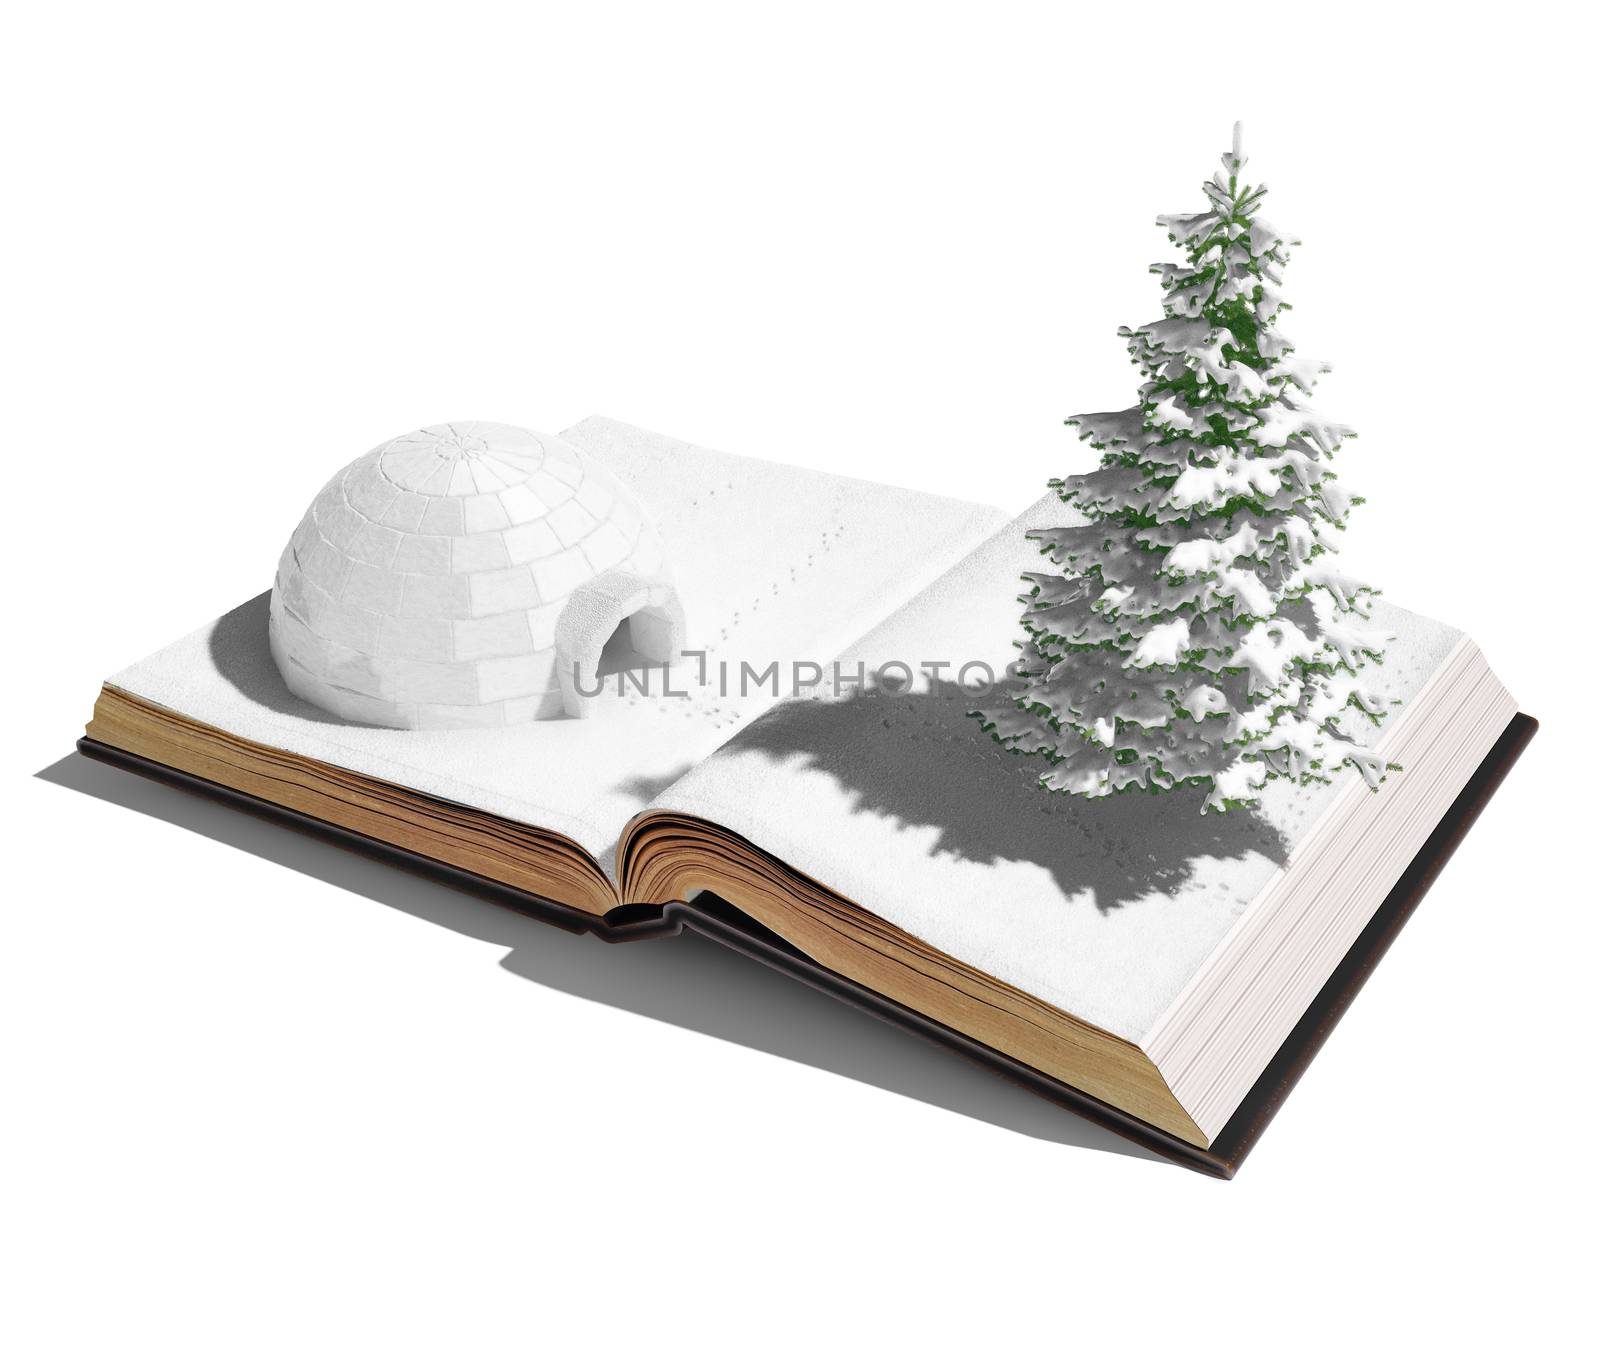 igloo on the open book. 3d concept 